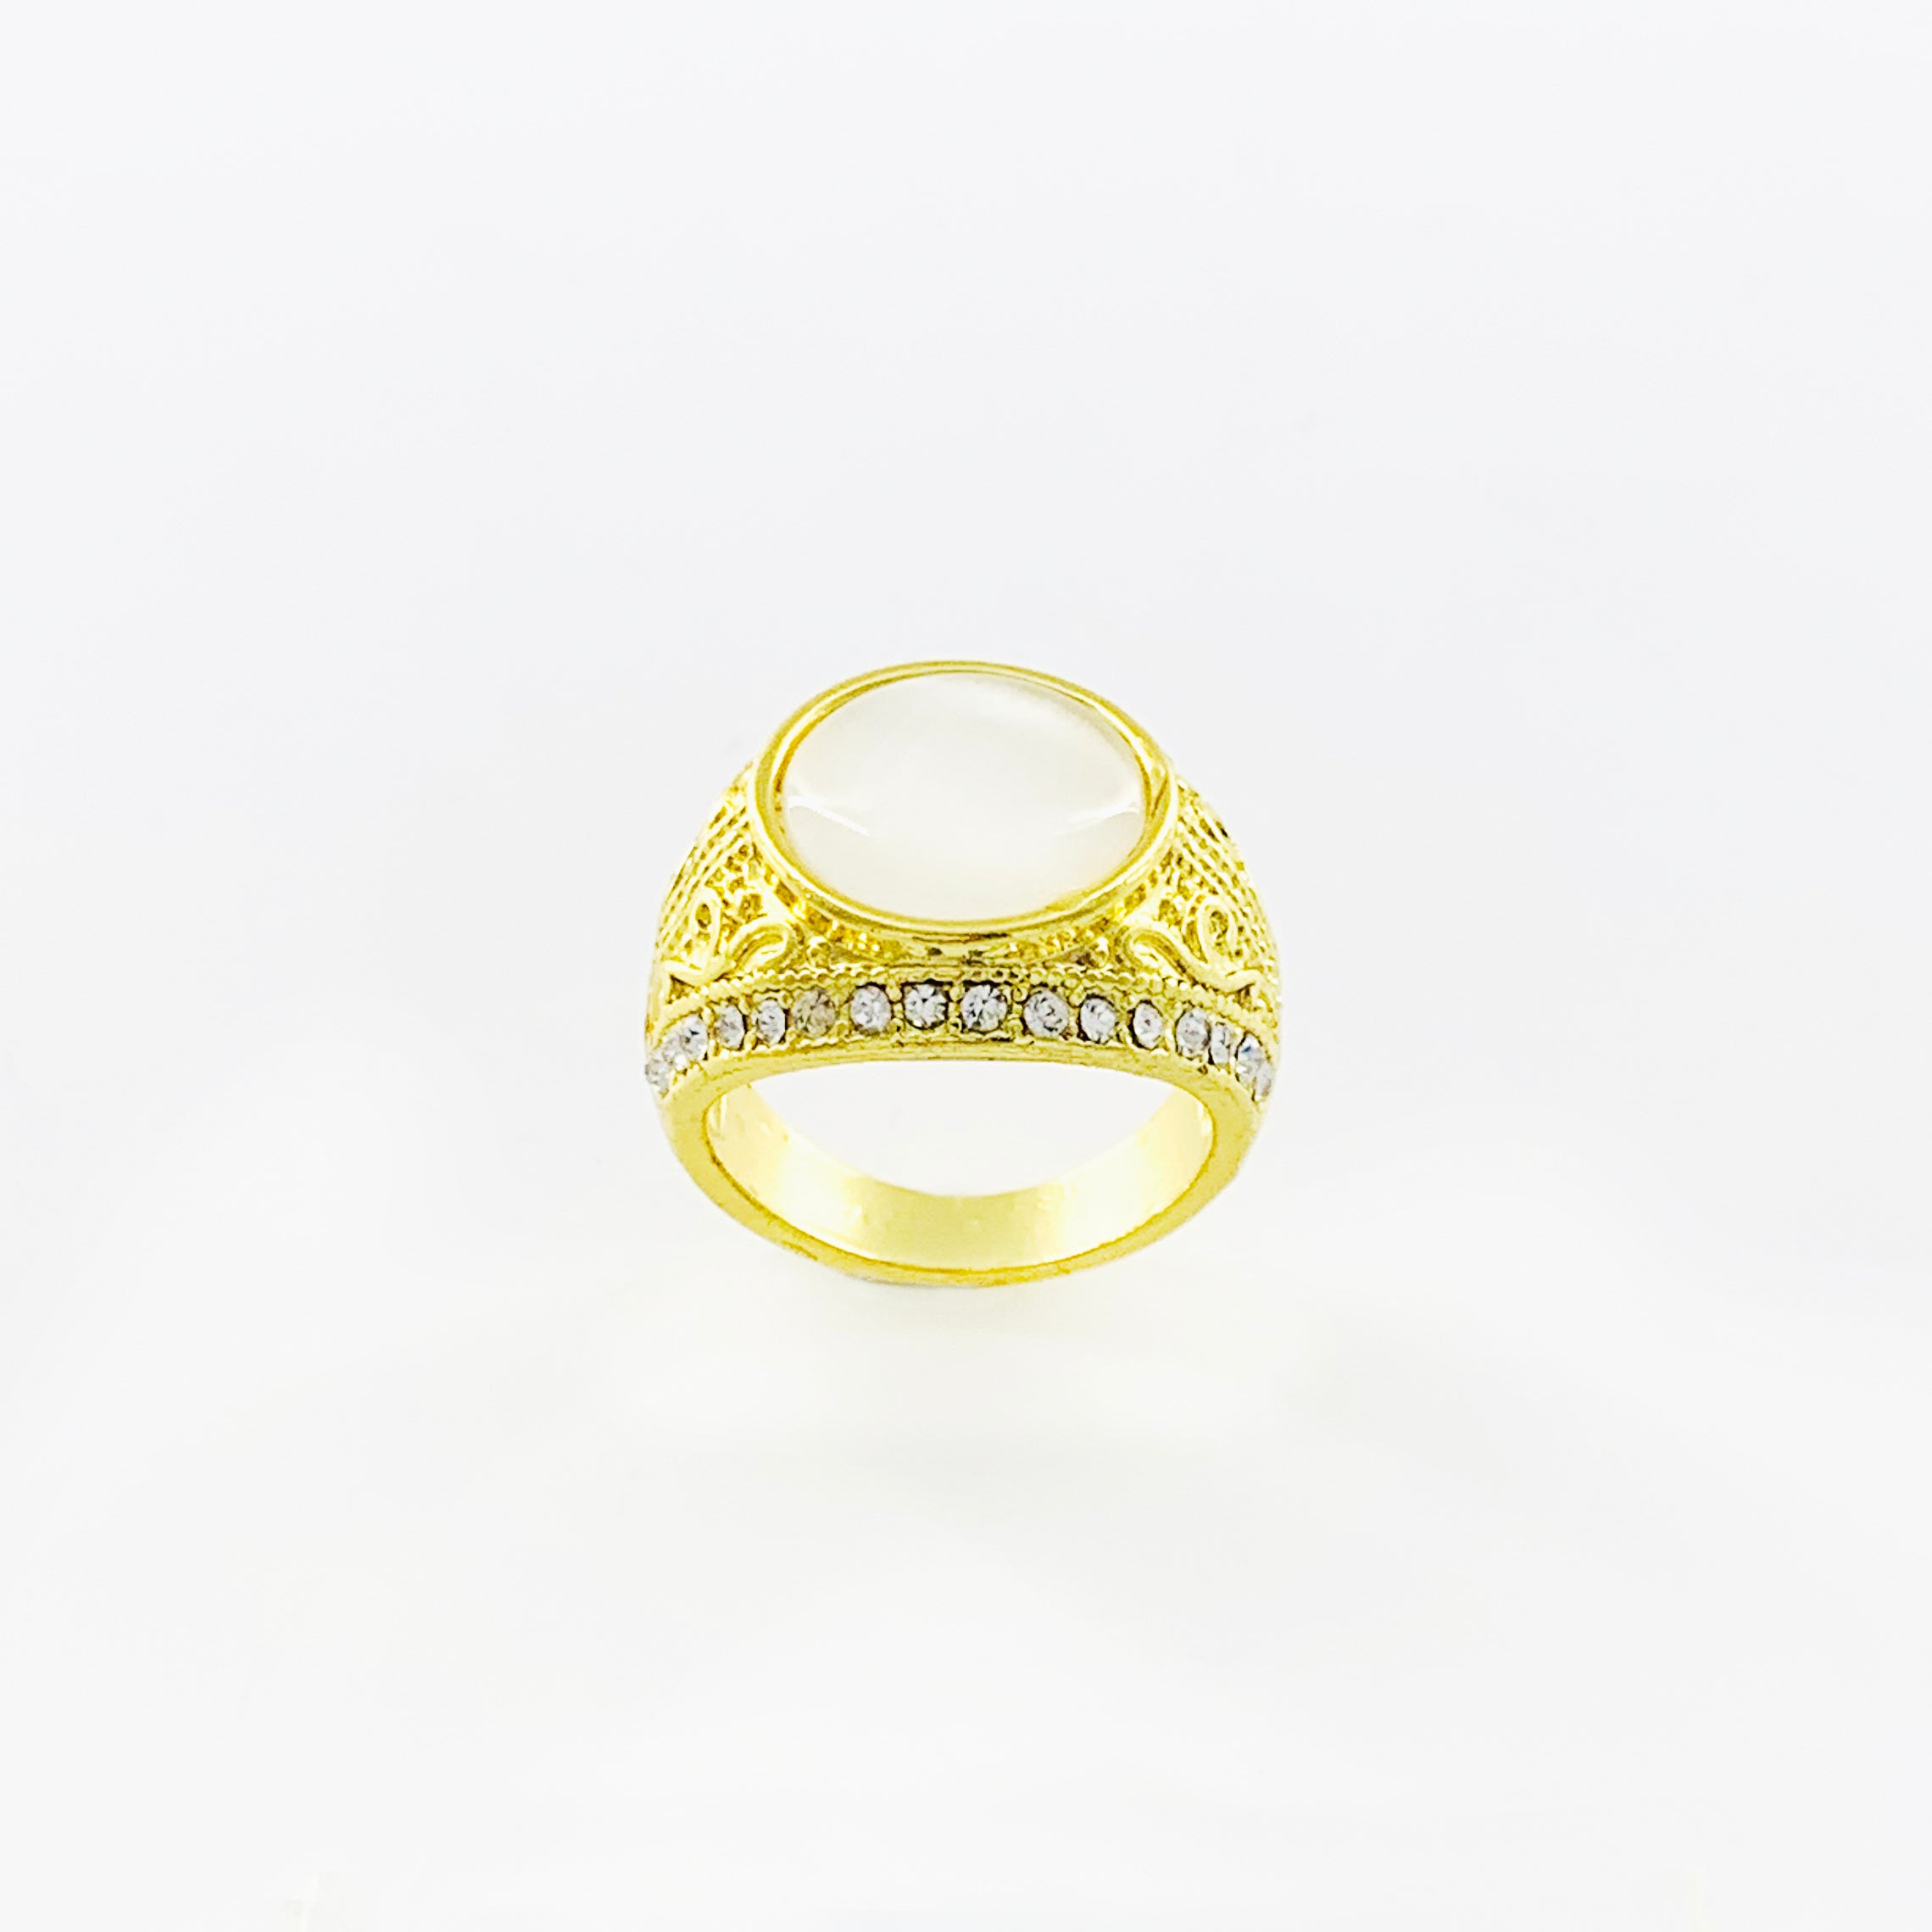 Chunky gold ring with white stone and diamante stones